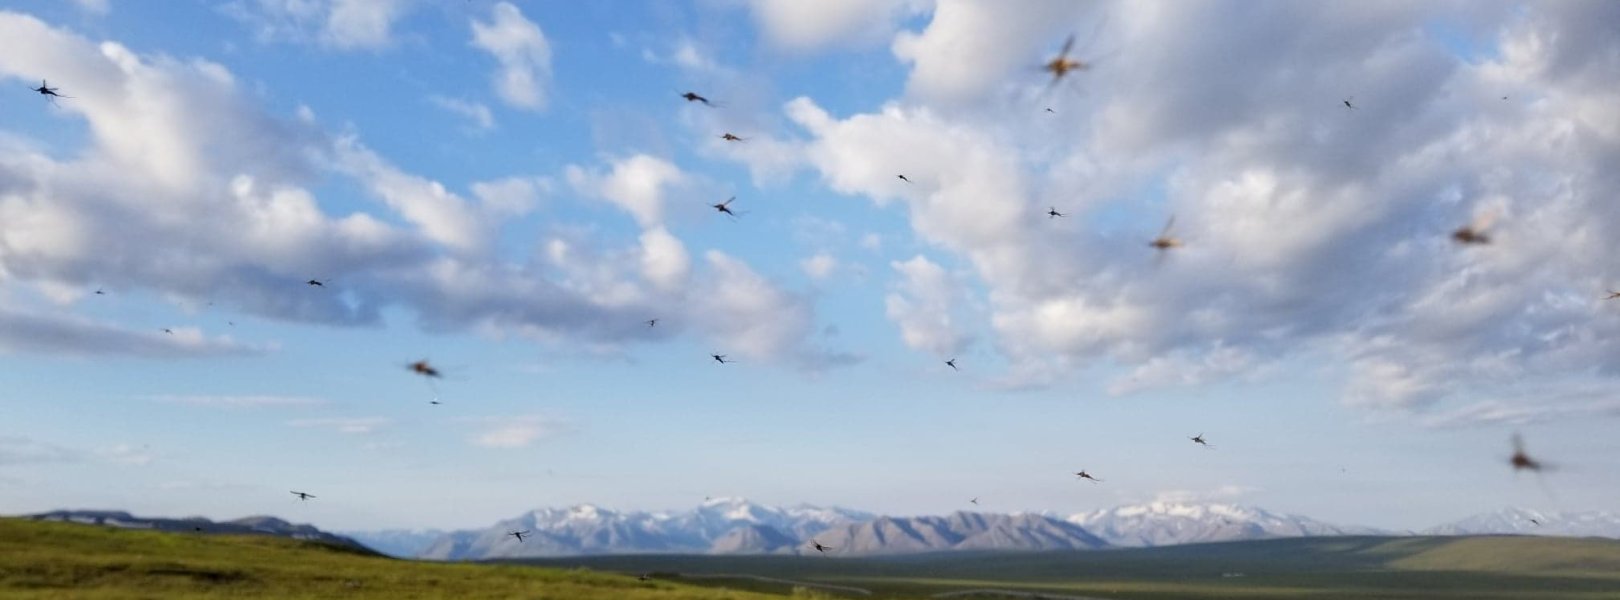 Mosquitos flying in a field with mountains in the background